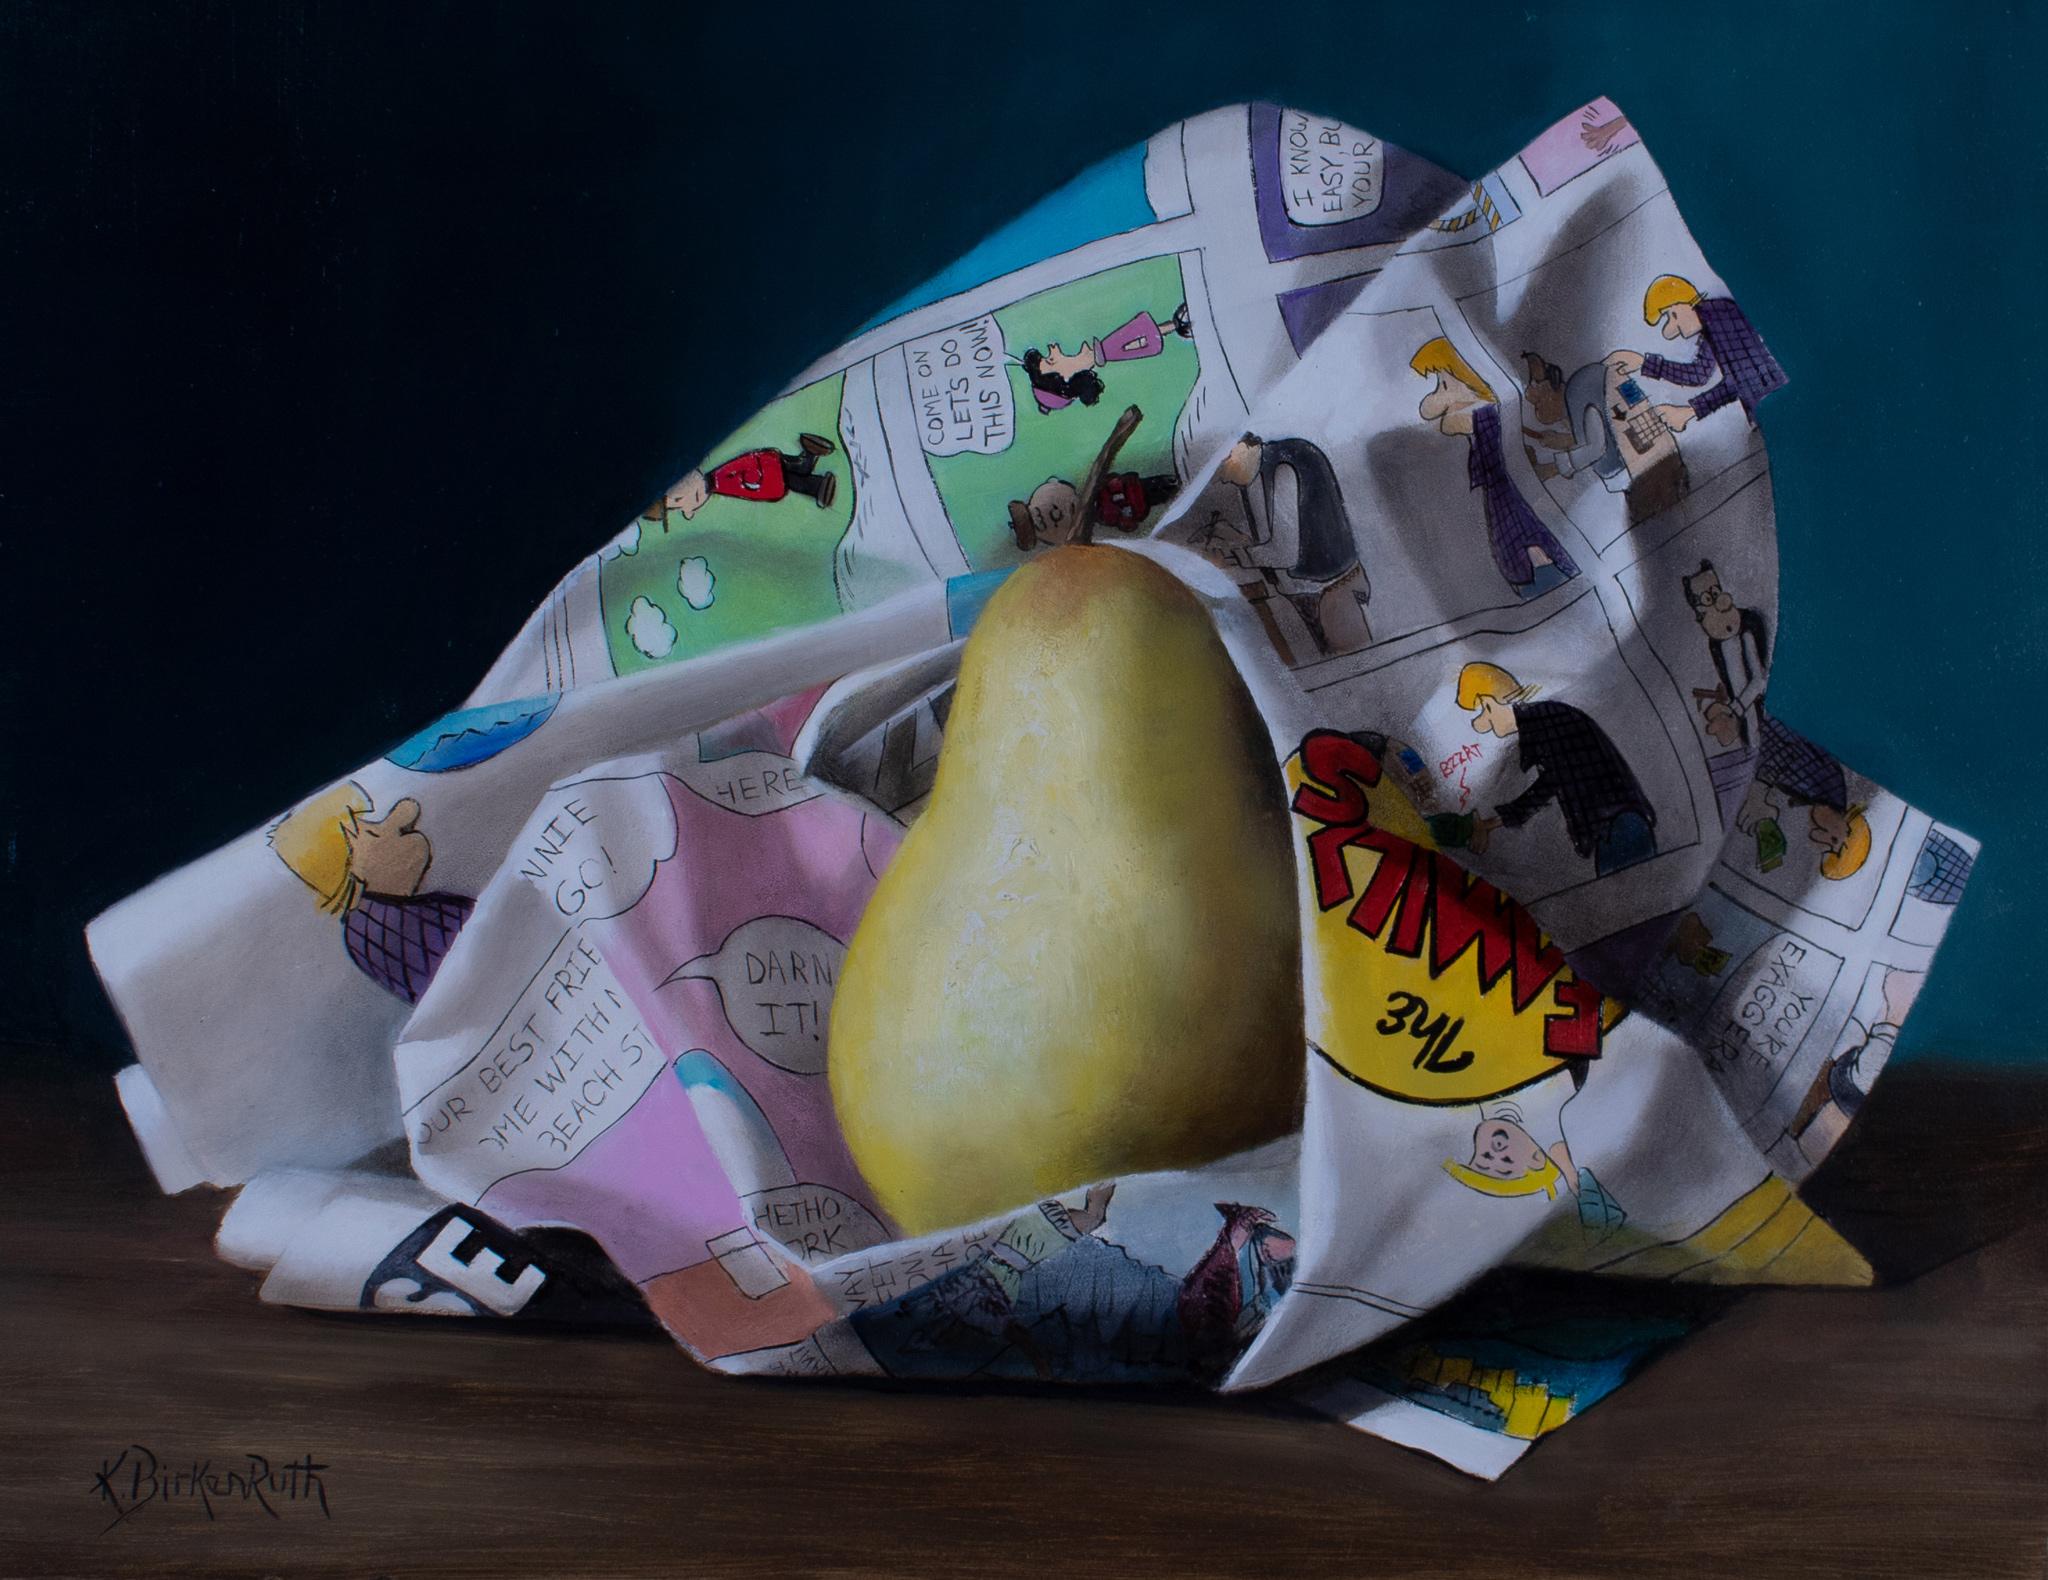 Kelly Birkenruth Still-Life Painting - "Covered in Comics, " Oil painting